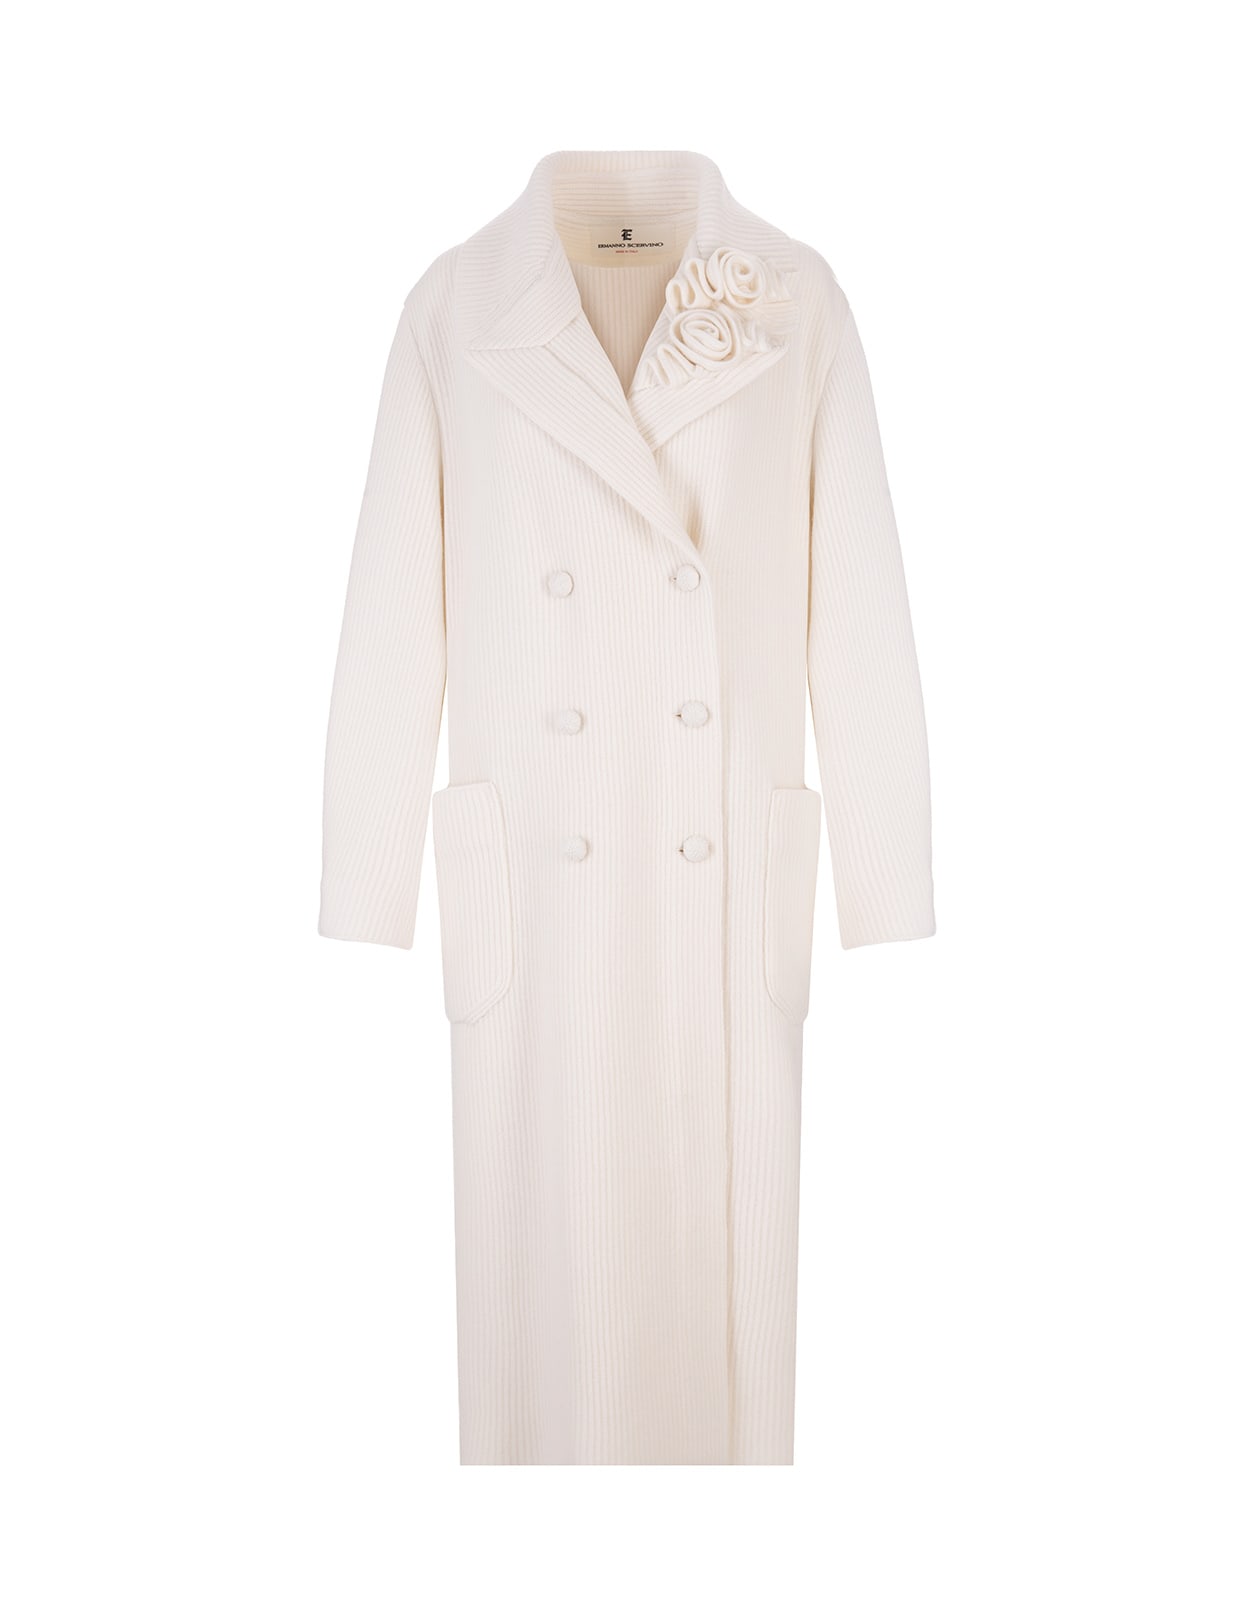 Ermanno Scervino White Double-breasted Coat With Embroideries